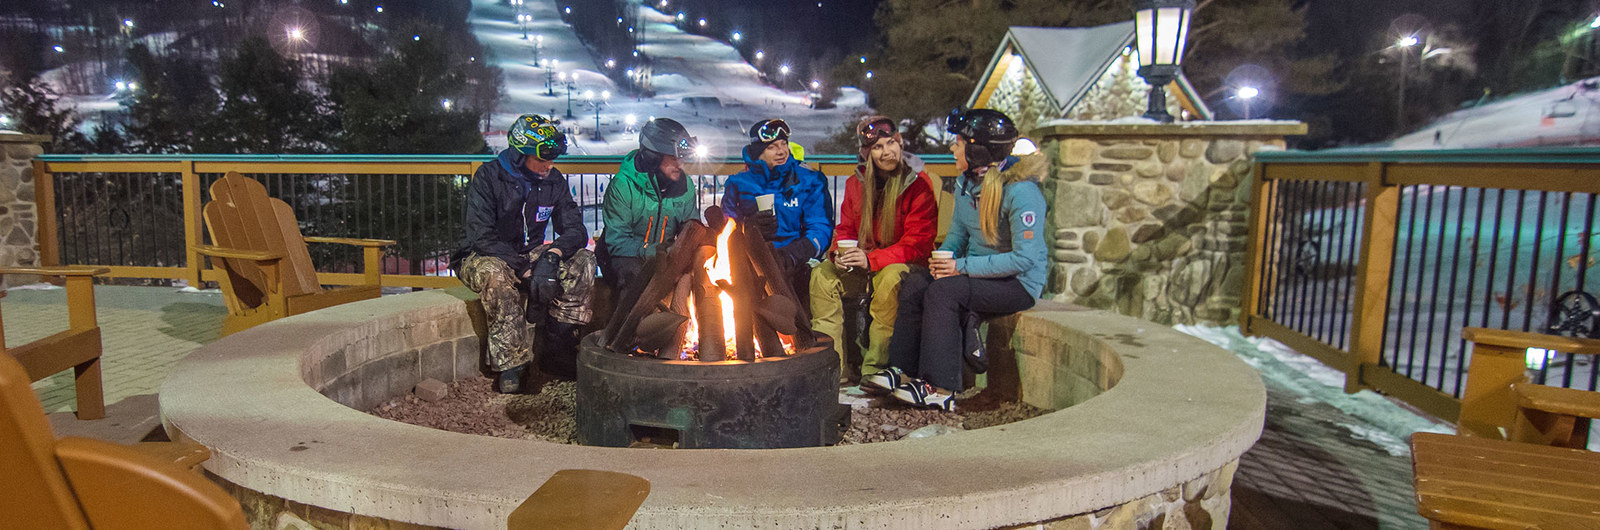 Group of skiers and snowboarders sitting around fire pit outside the mountain ski lodge